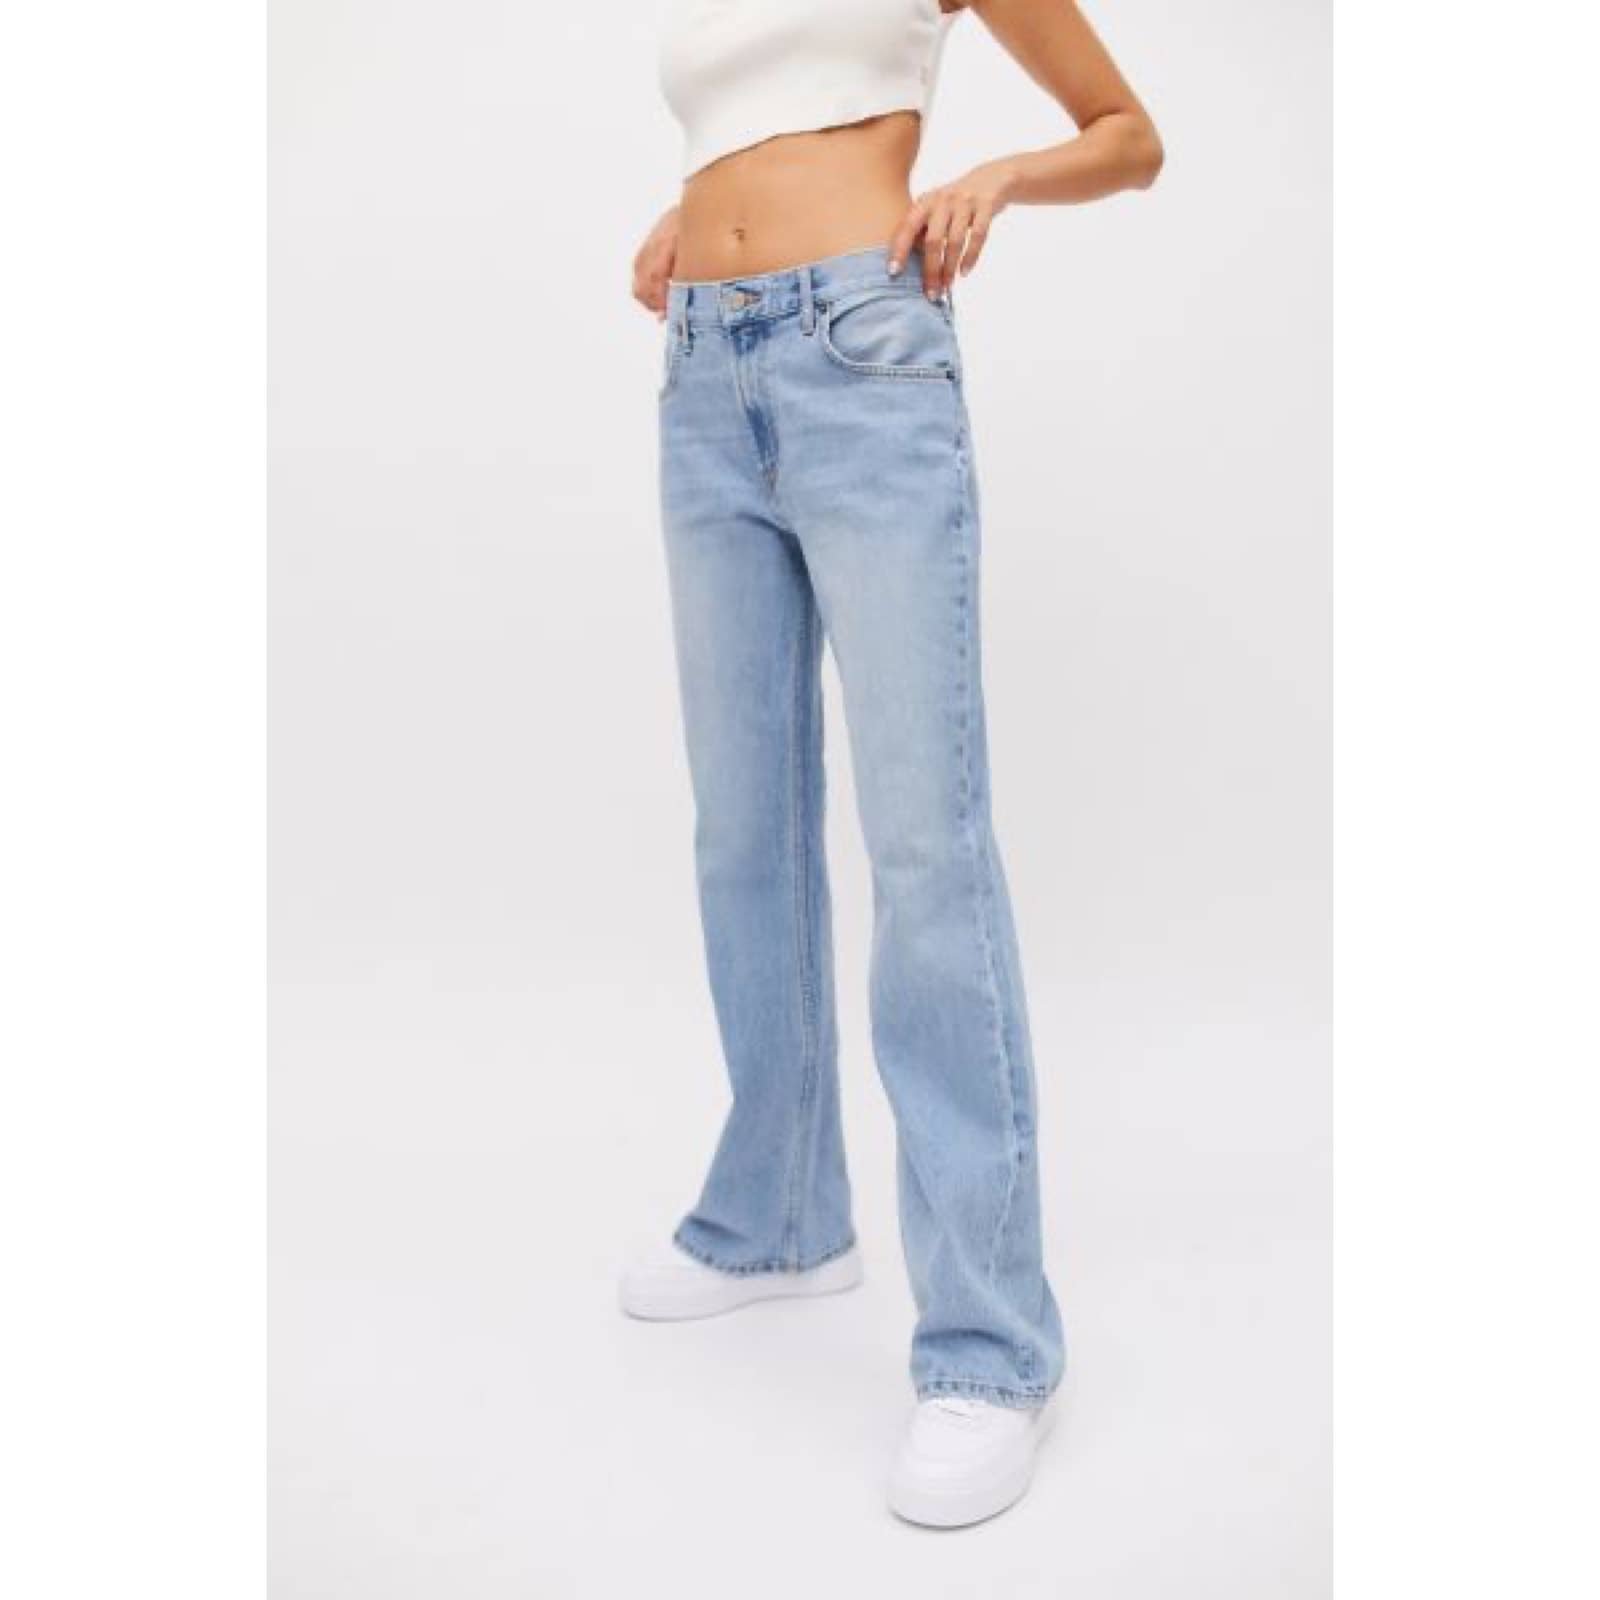 Classic BDG ´90s Mid-Rise Bootcut Jean in Light Blue Size 34 hAG9s62pu Wholesale